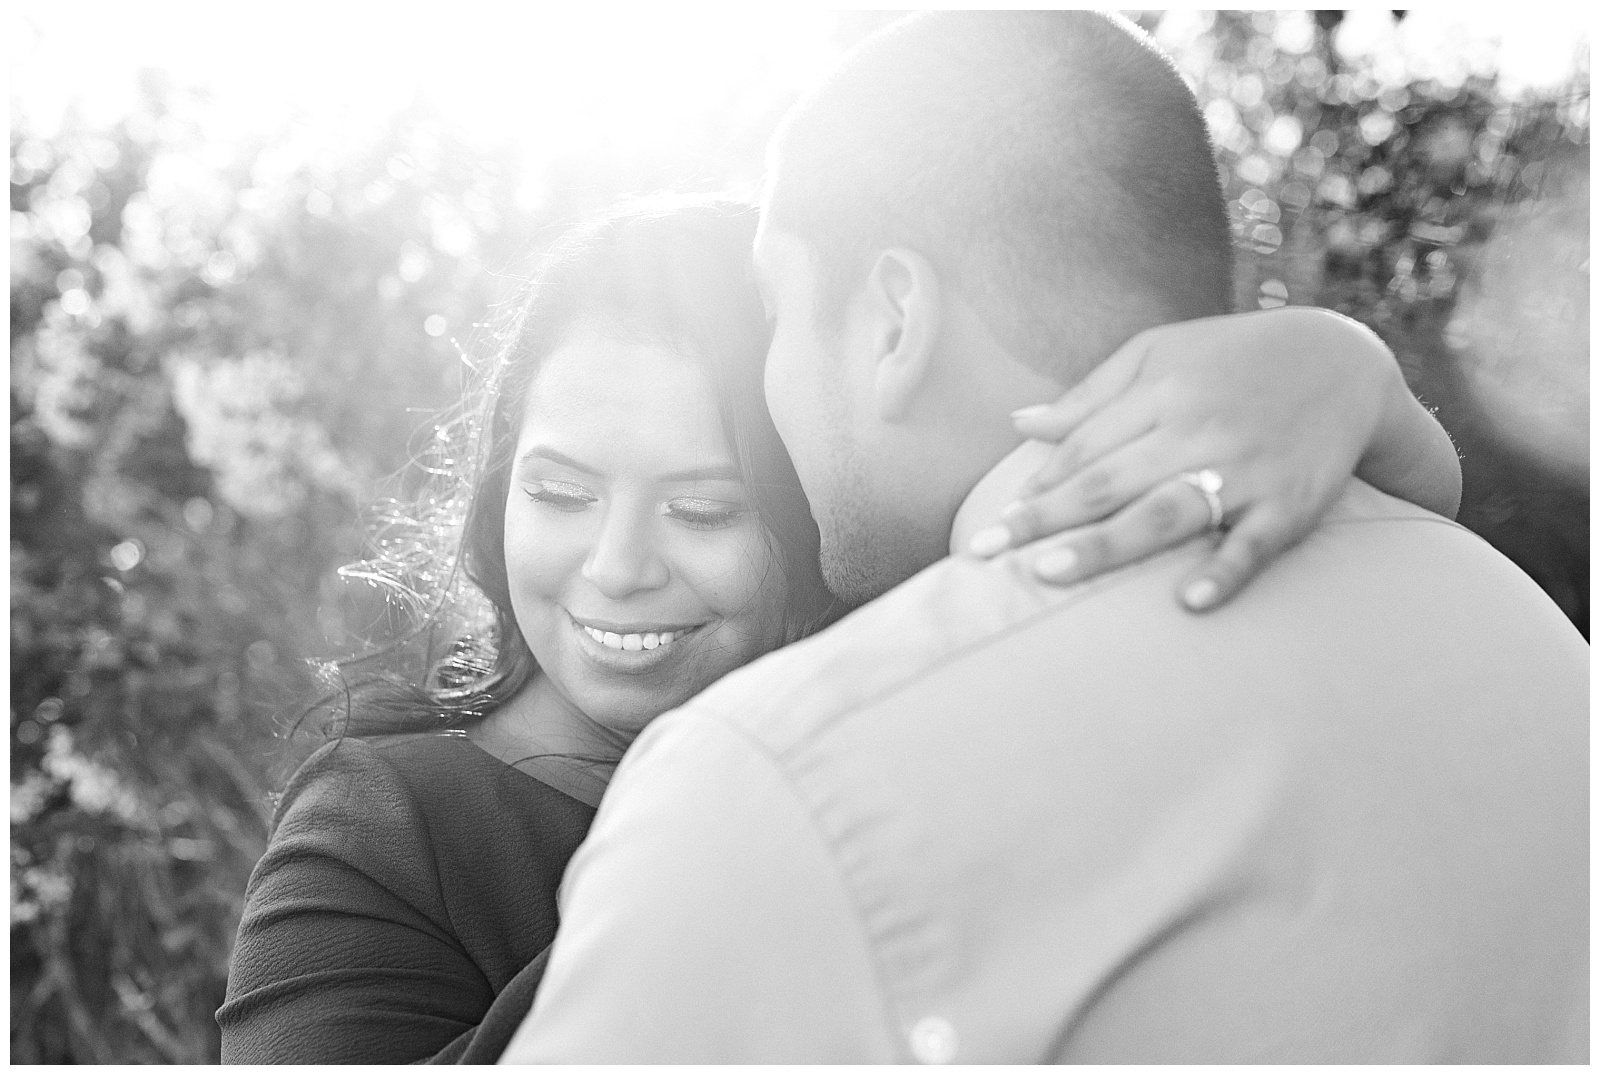 Engaged,Engagement Session,Field,Garden,Jersey City,Liberty State Park,NJ,Nature,Wedding Photographer,